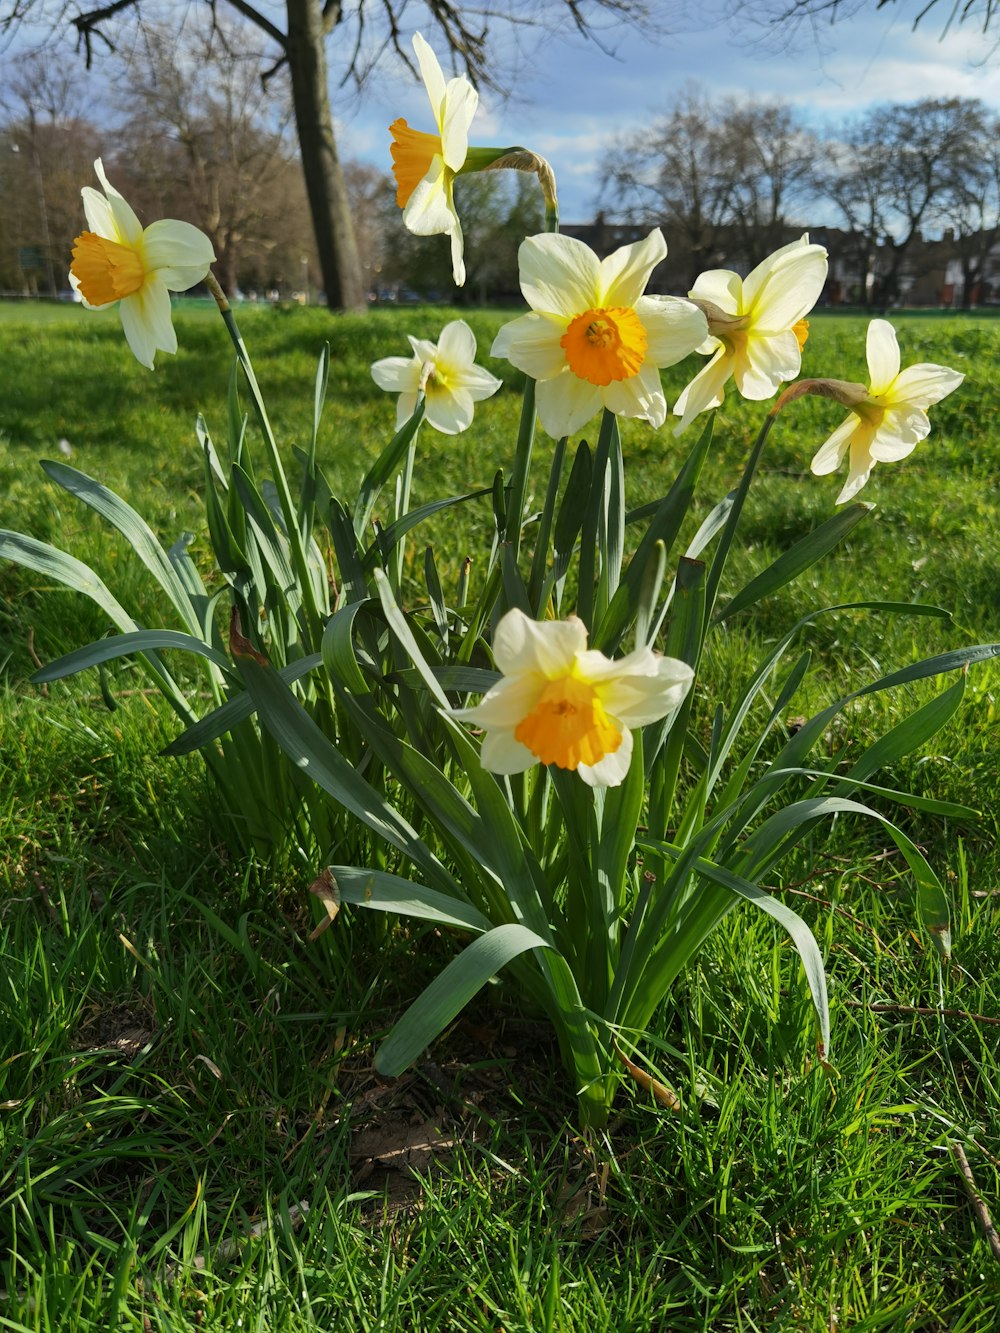 a group of yellow and white daffodils in the grass